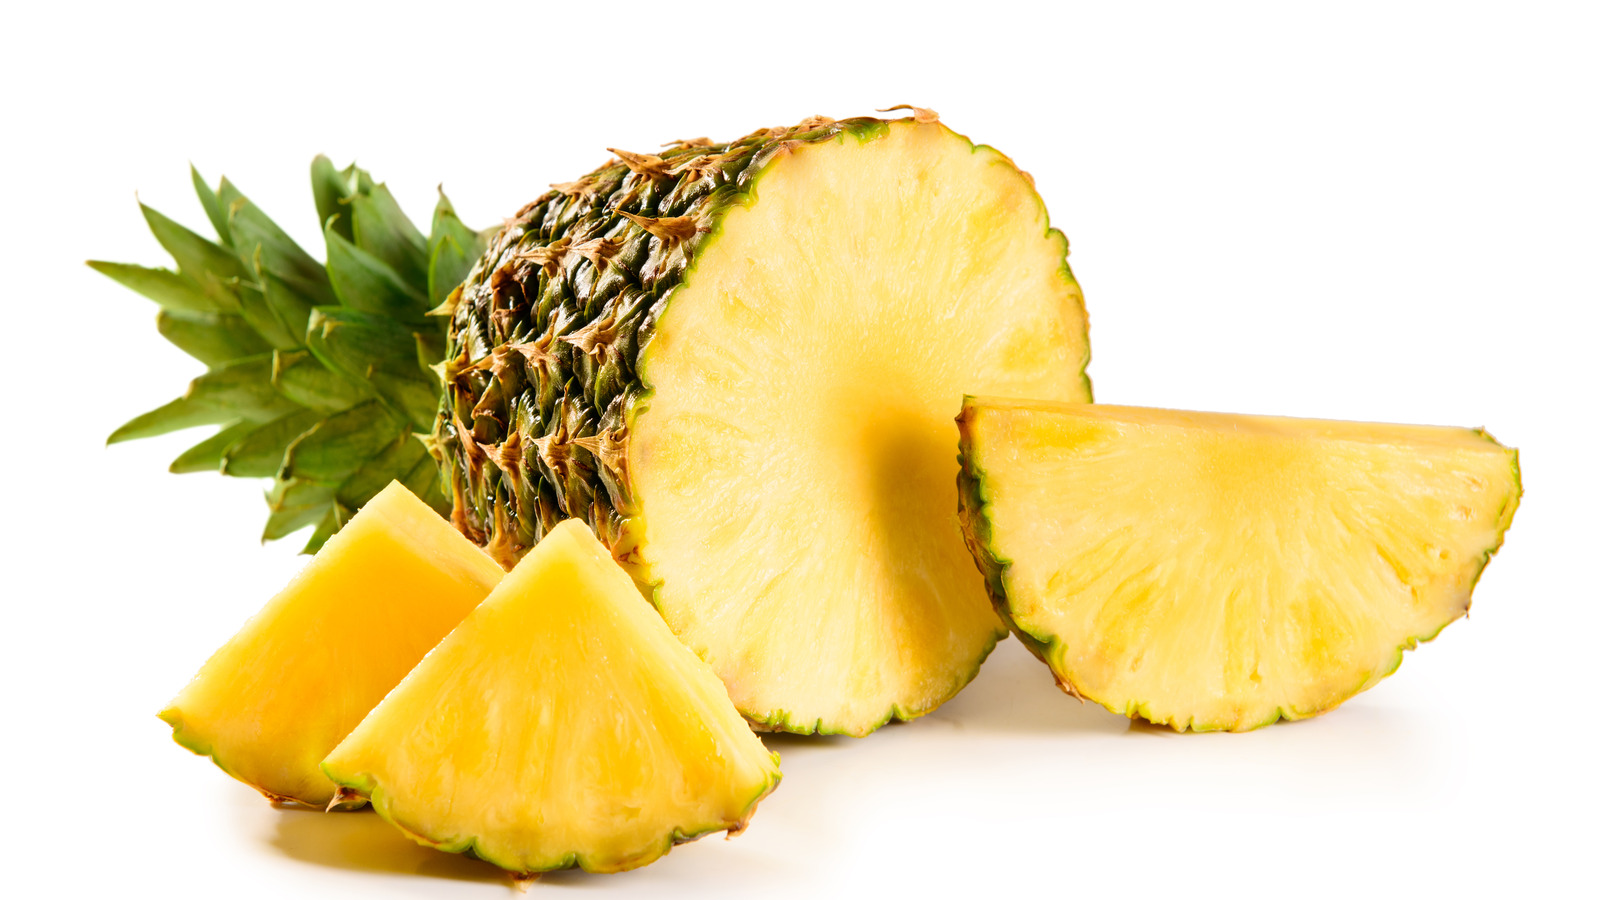 Why Pineapple Makes A Good Meat Tenderizer - Tasting Table